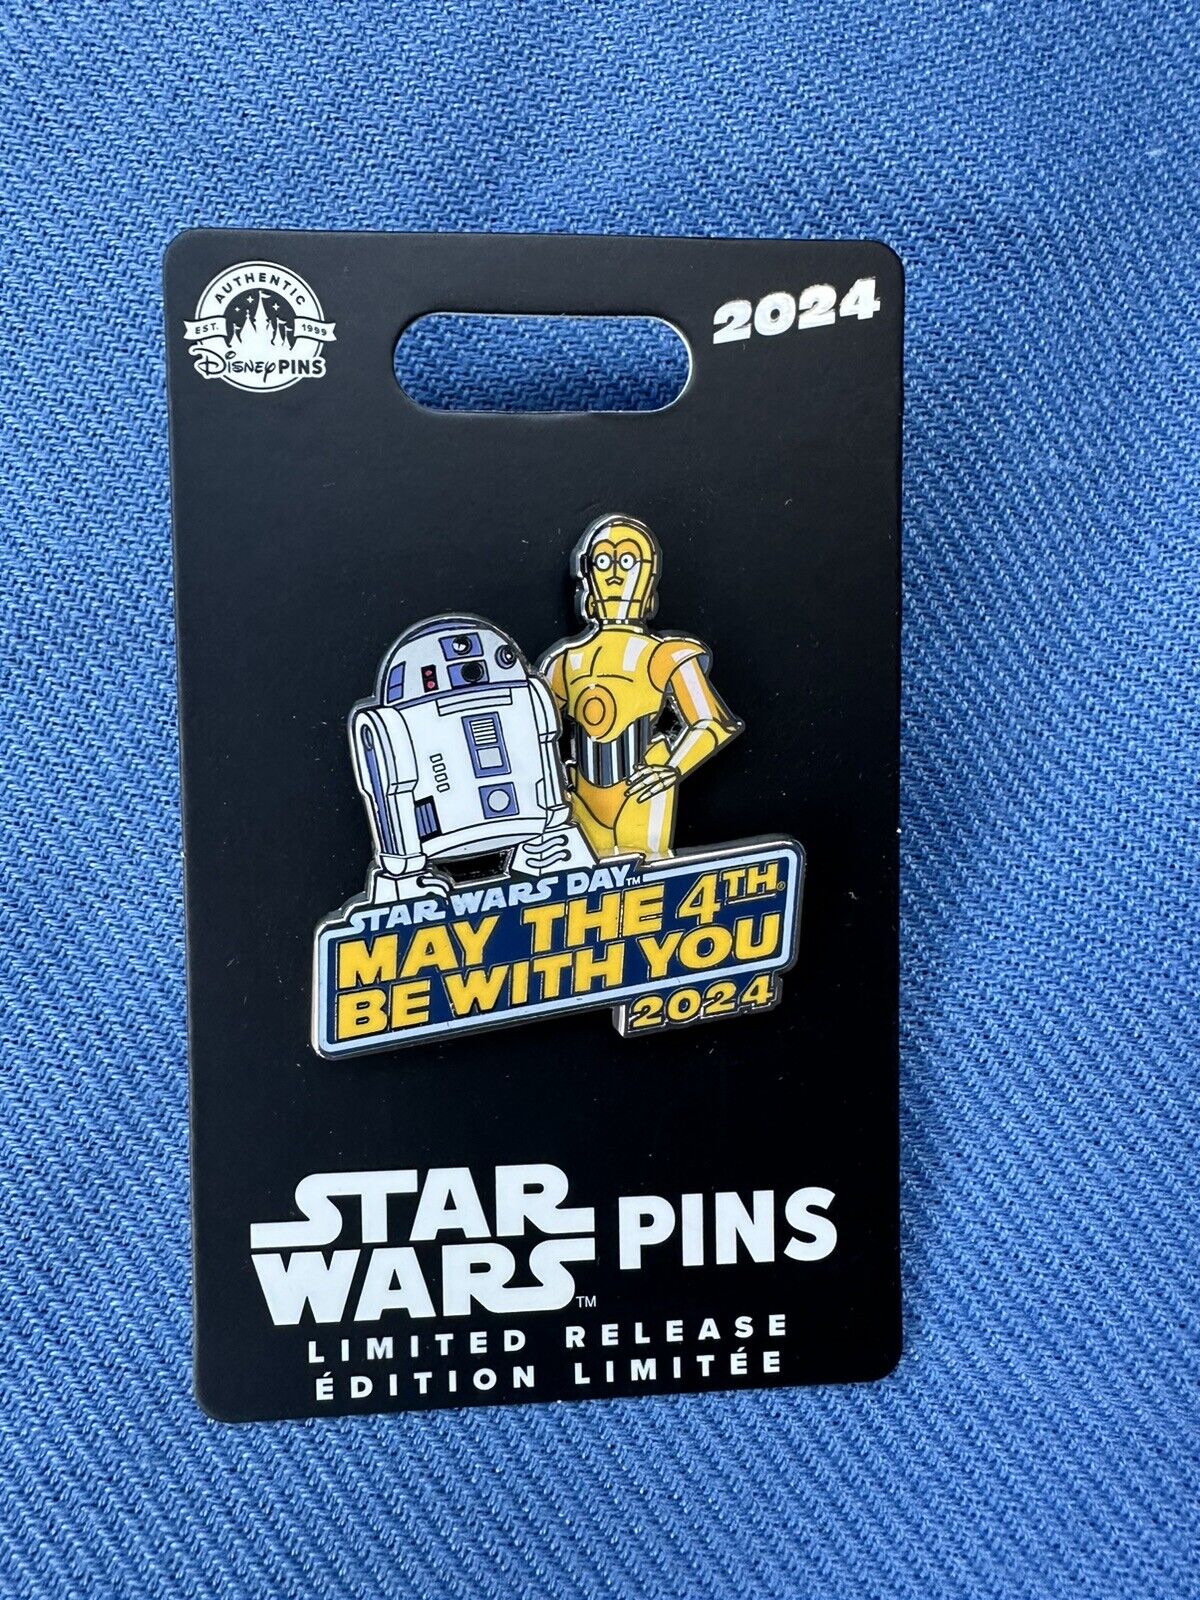 2024 Disney Parks Star Wars R2-D2 & C-3PO May the 4th Be With You Droids Pin LR